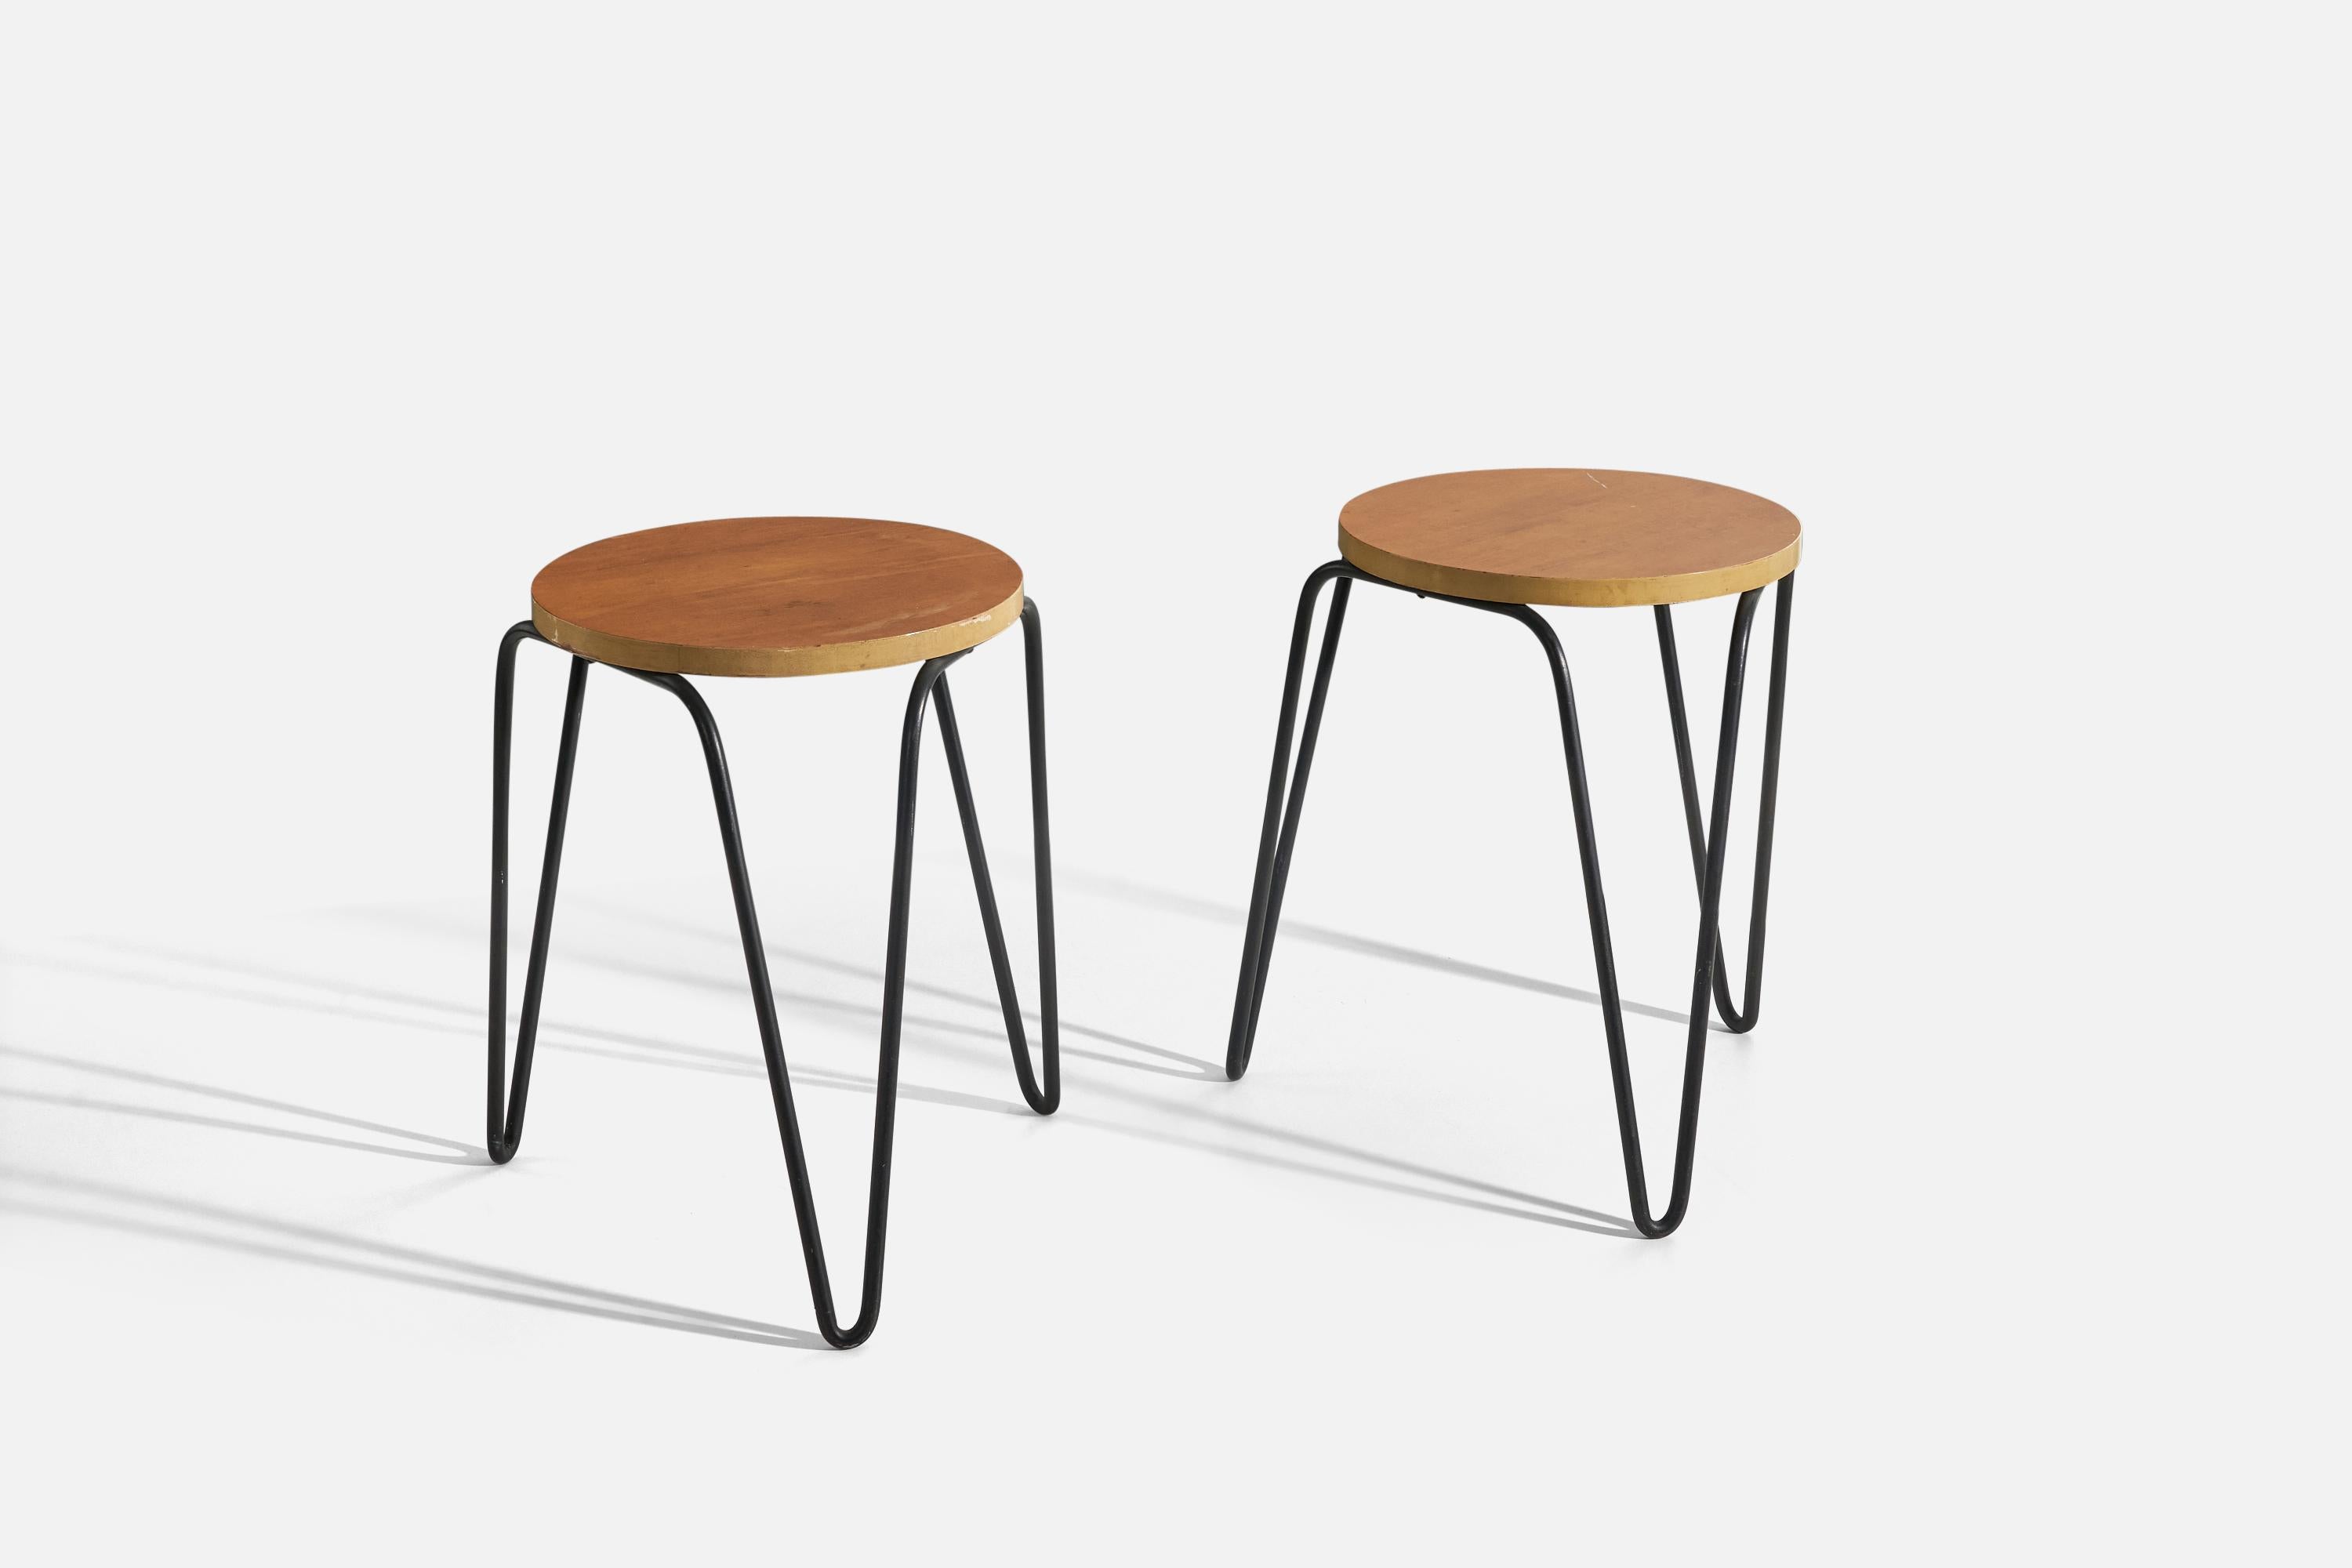 A pair of birch and iron stools, model 75, designed by Florence Knoll and produced by Knoll Associates, USA, 1948.